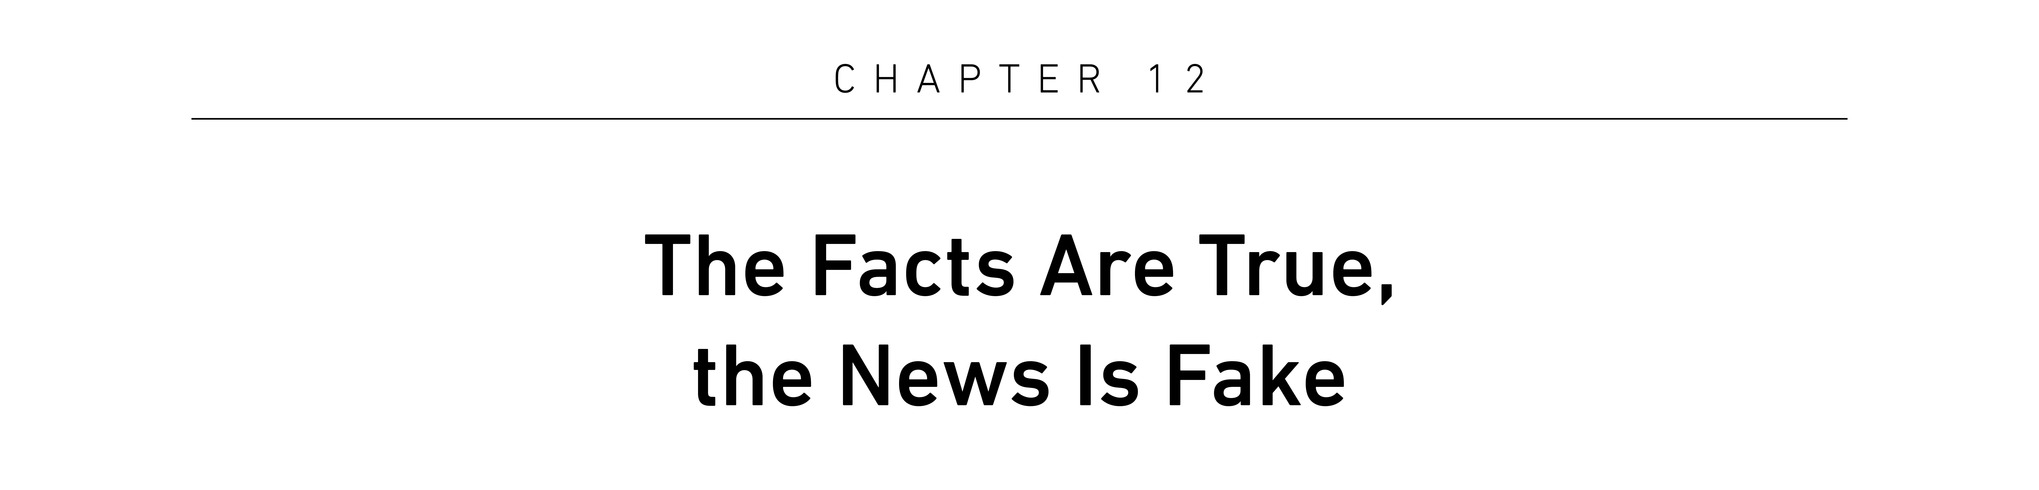 Chapter 12 The Facts Are True, the News Is Fake